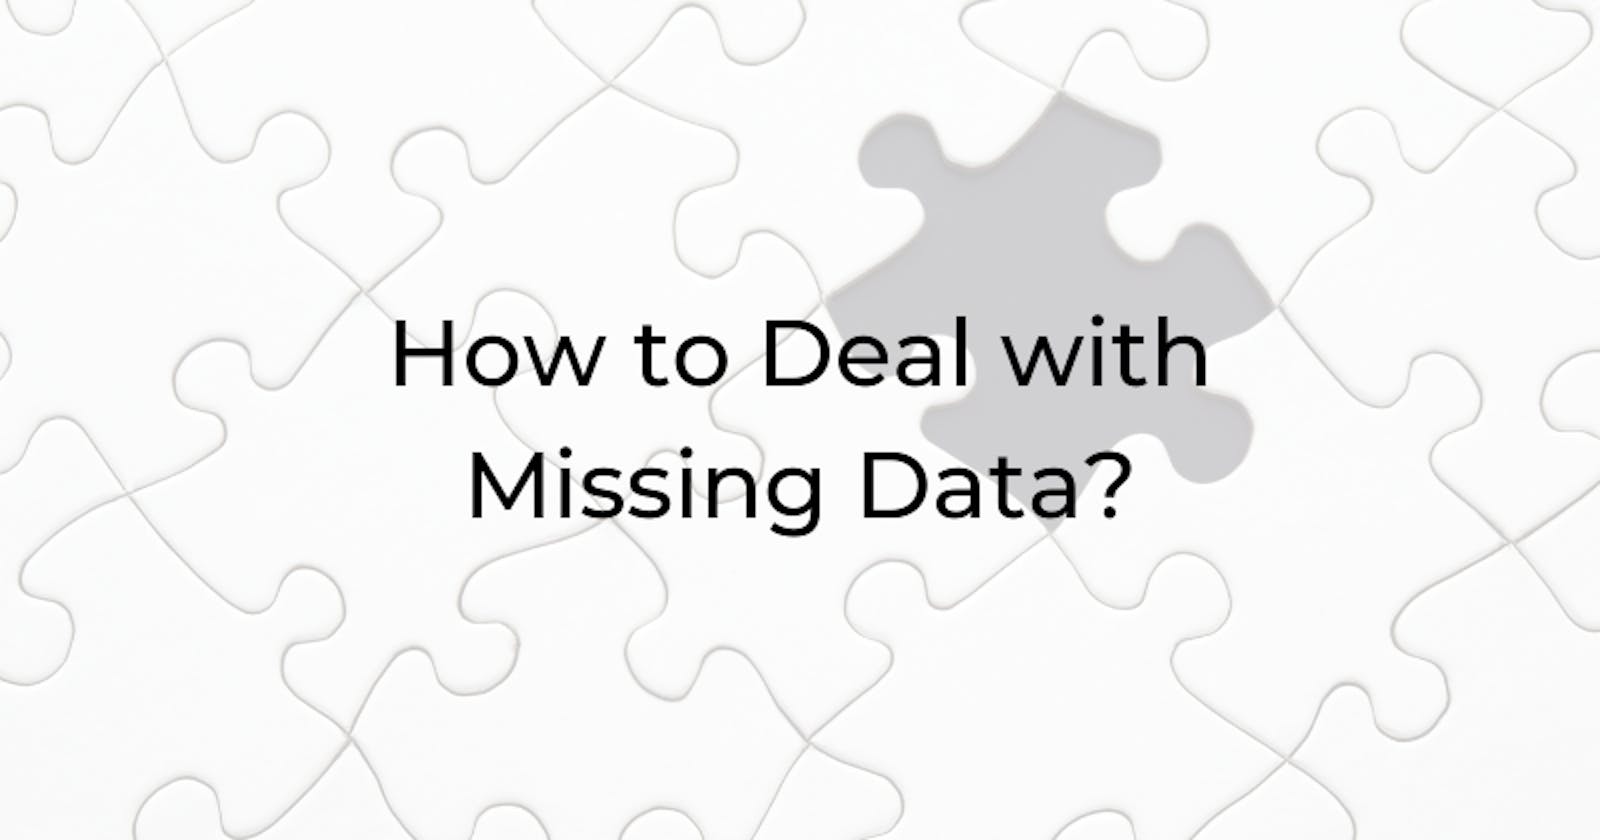 How to Deal with Missing Data?